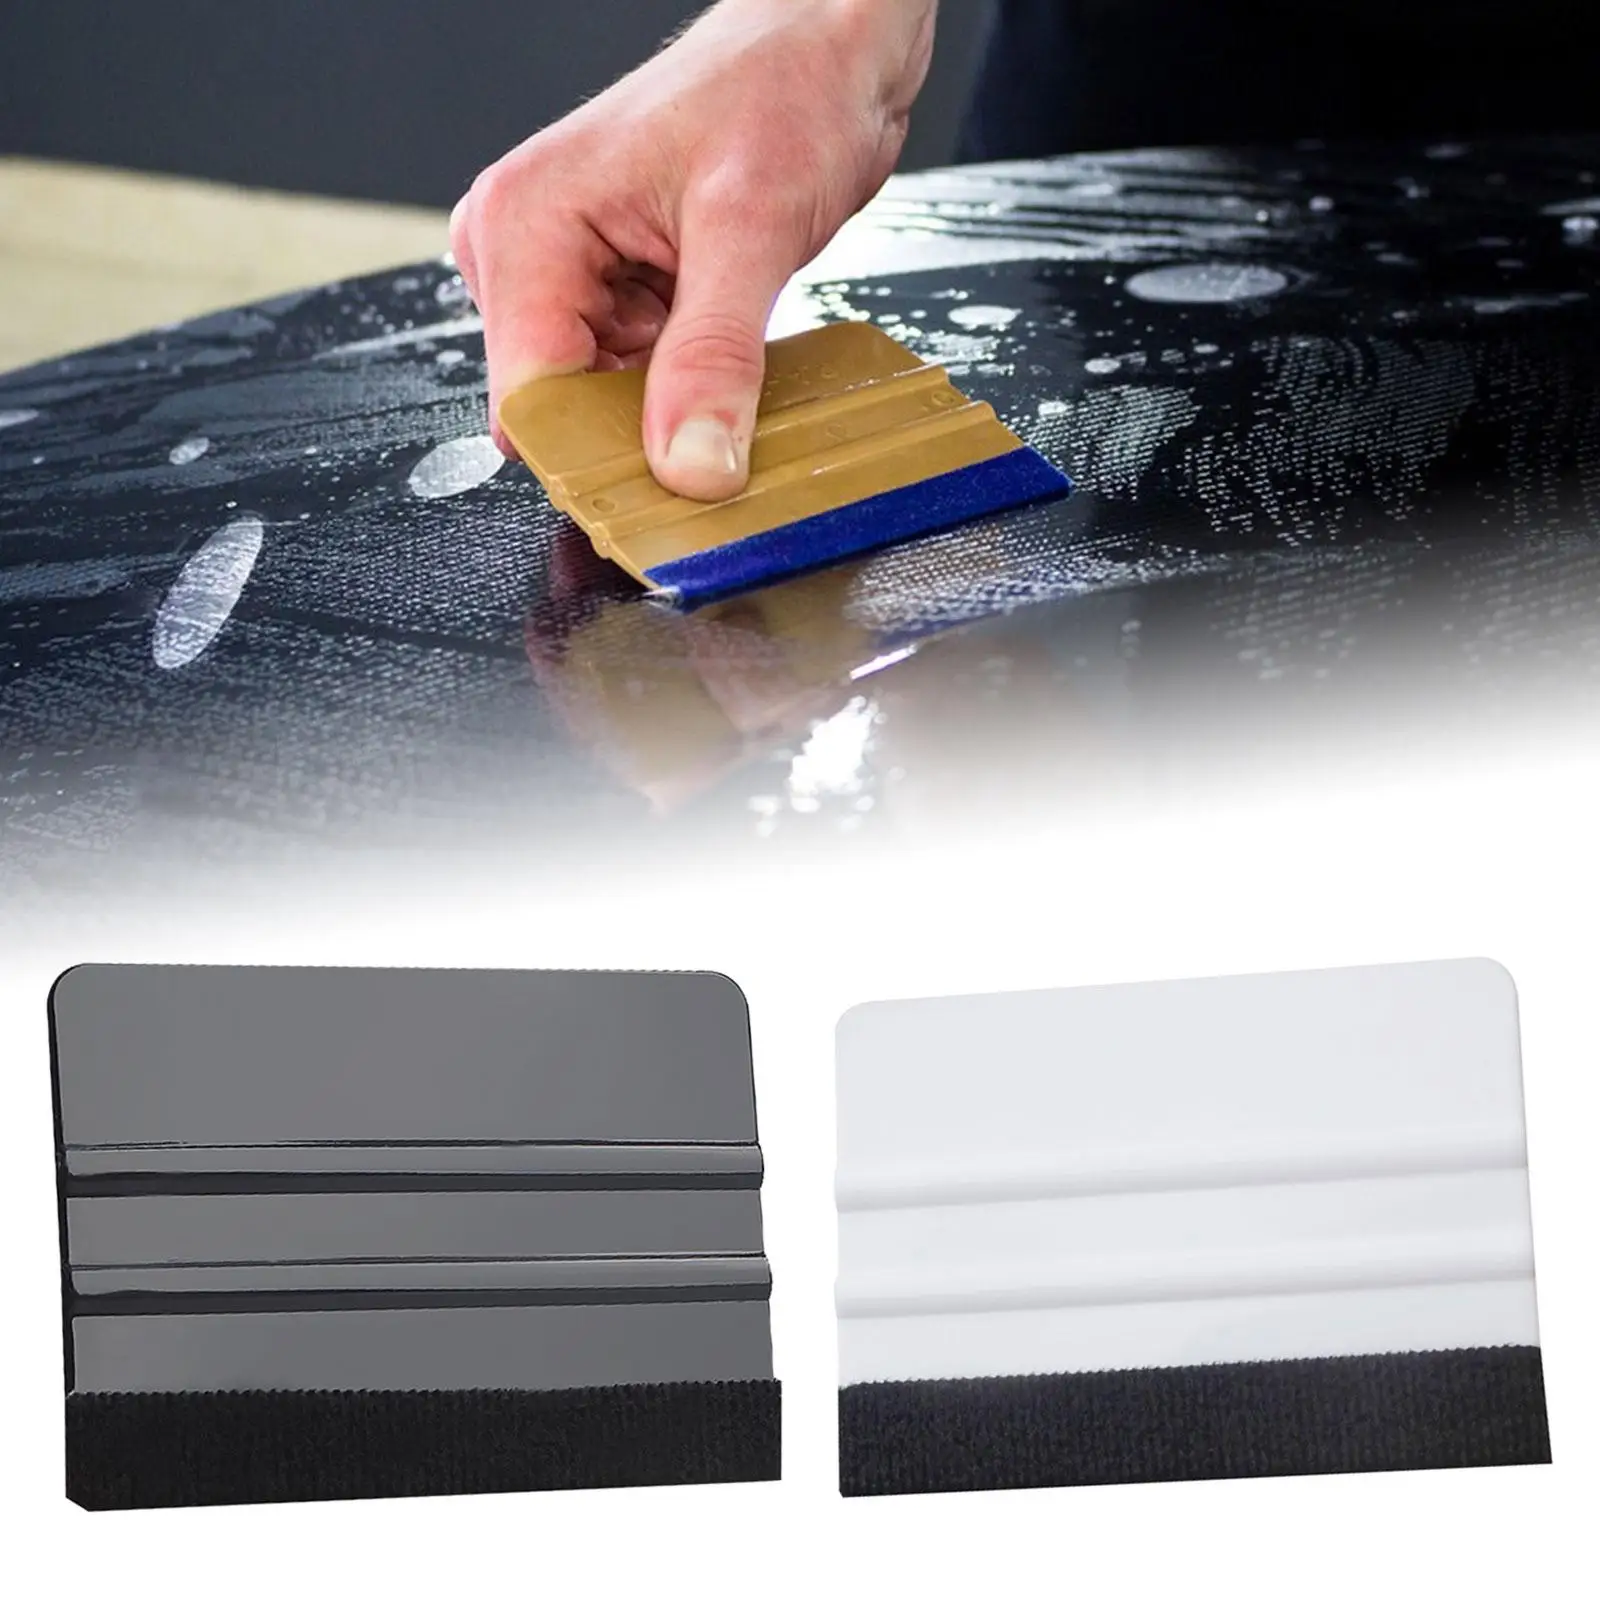 5x Auto Film Scraper Paint Scraper for Making Surface Tidy Paint Protection Film Pushing Out Bubble Lines Window Tint